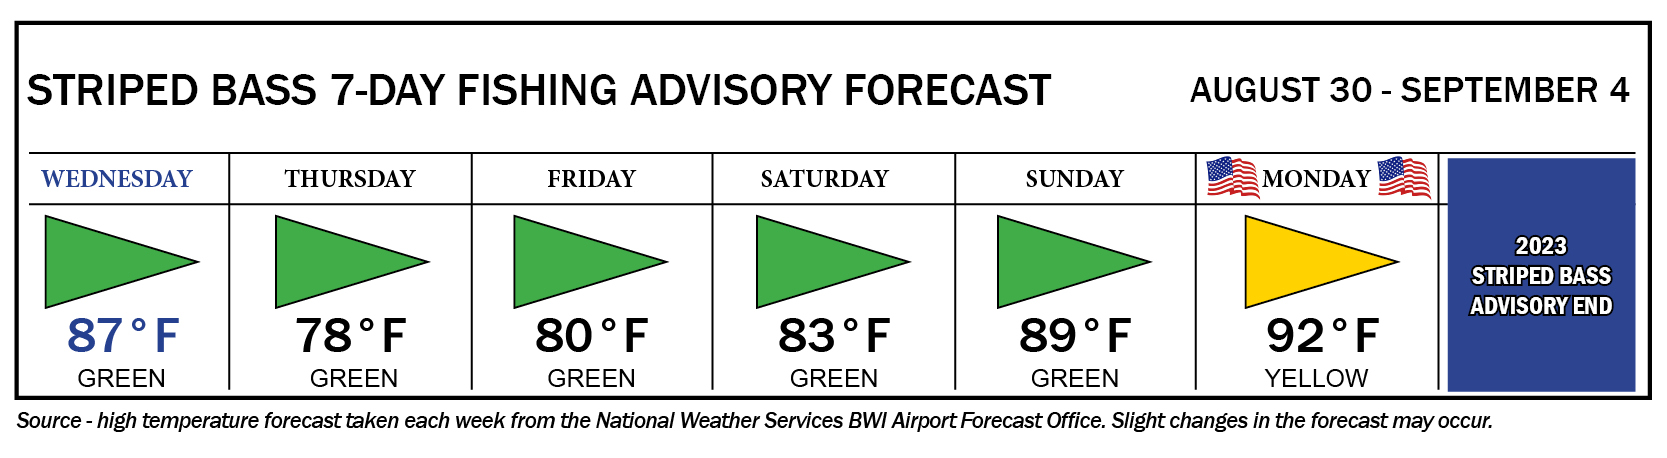 Image of Striped Bass Advisory Forecast showing green flag days on Wednesday, Sunday, and Tuesday; yellow flag days on Thursday, Friday, Saturday, and Monday.